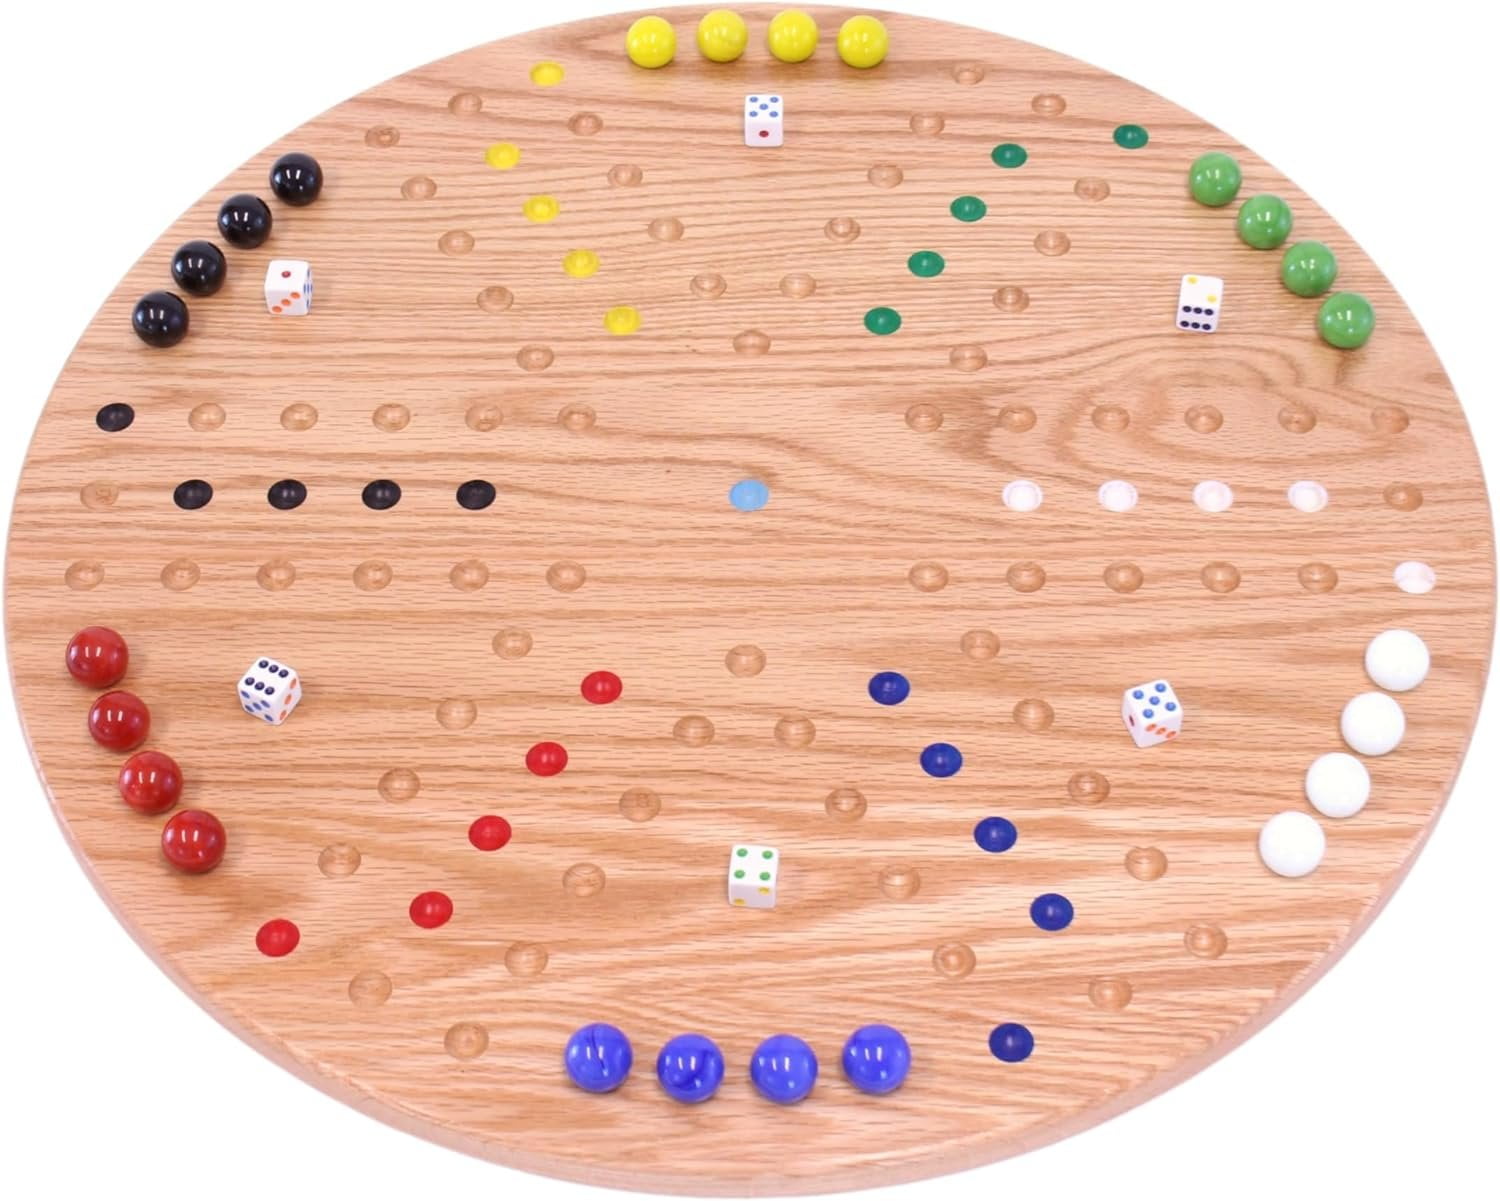 6 Player Aggravation Marbles - Shields Childcare Supplies